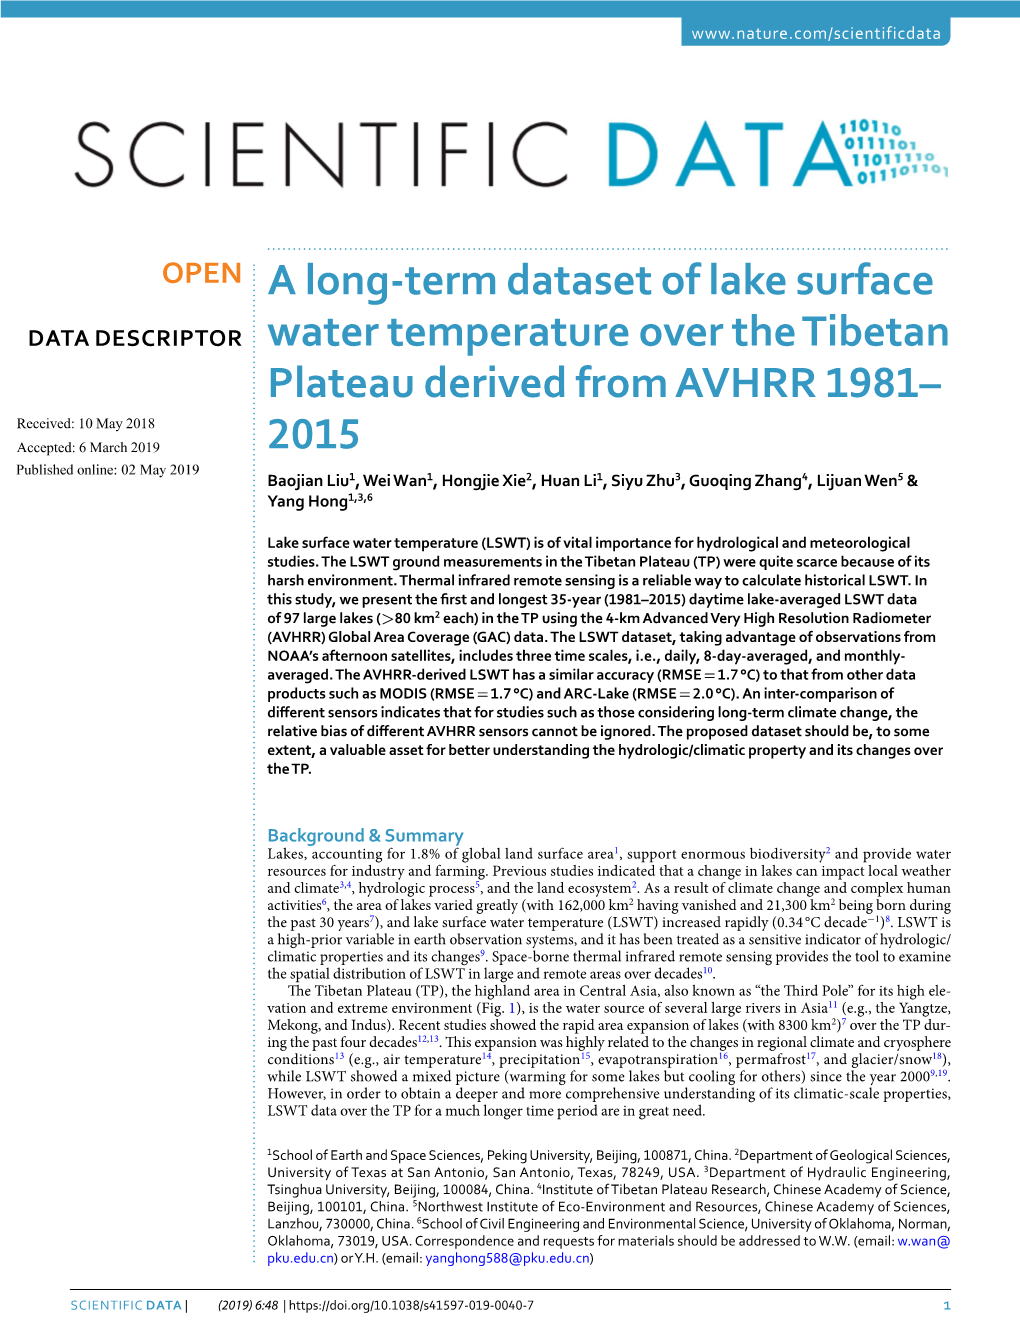 A Long-Term Dataset of Lake Surface Water Temperature Over the Tibetan Plateau Derived from AVHRR 1981–2015